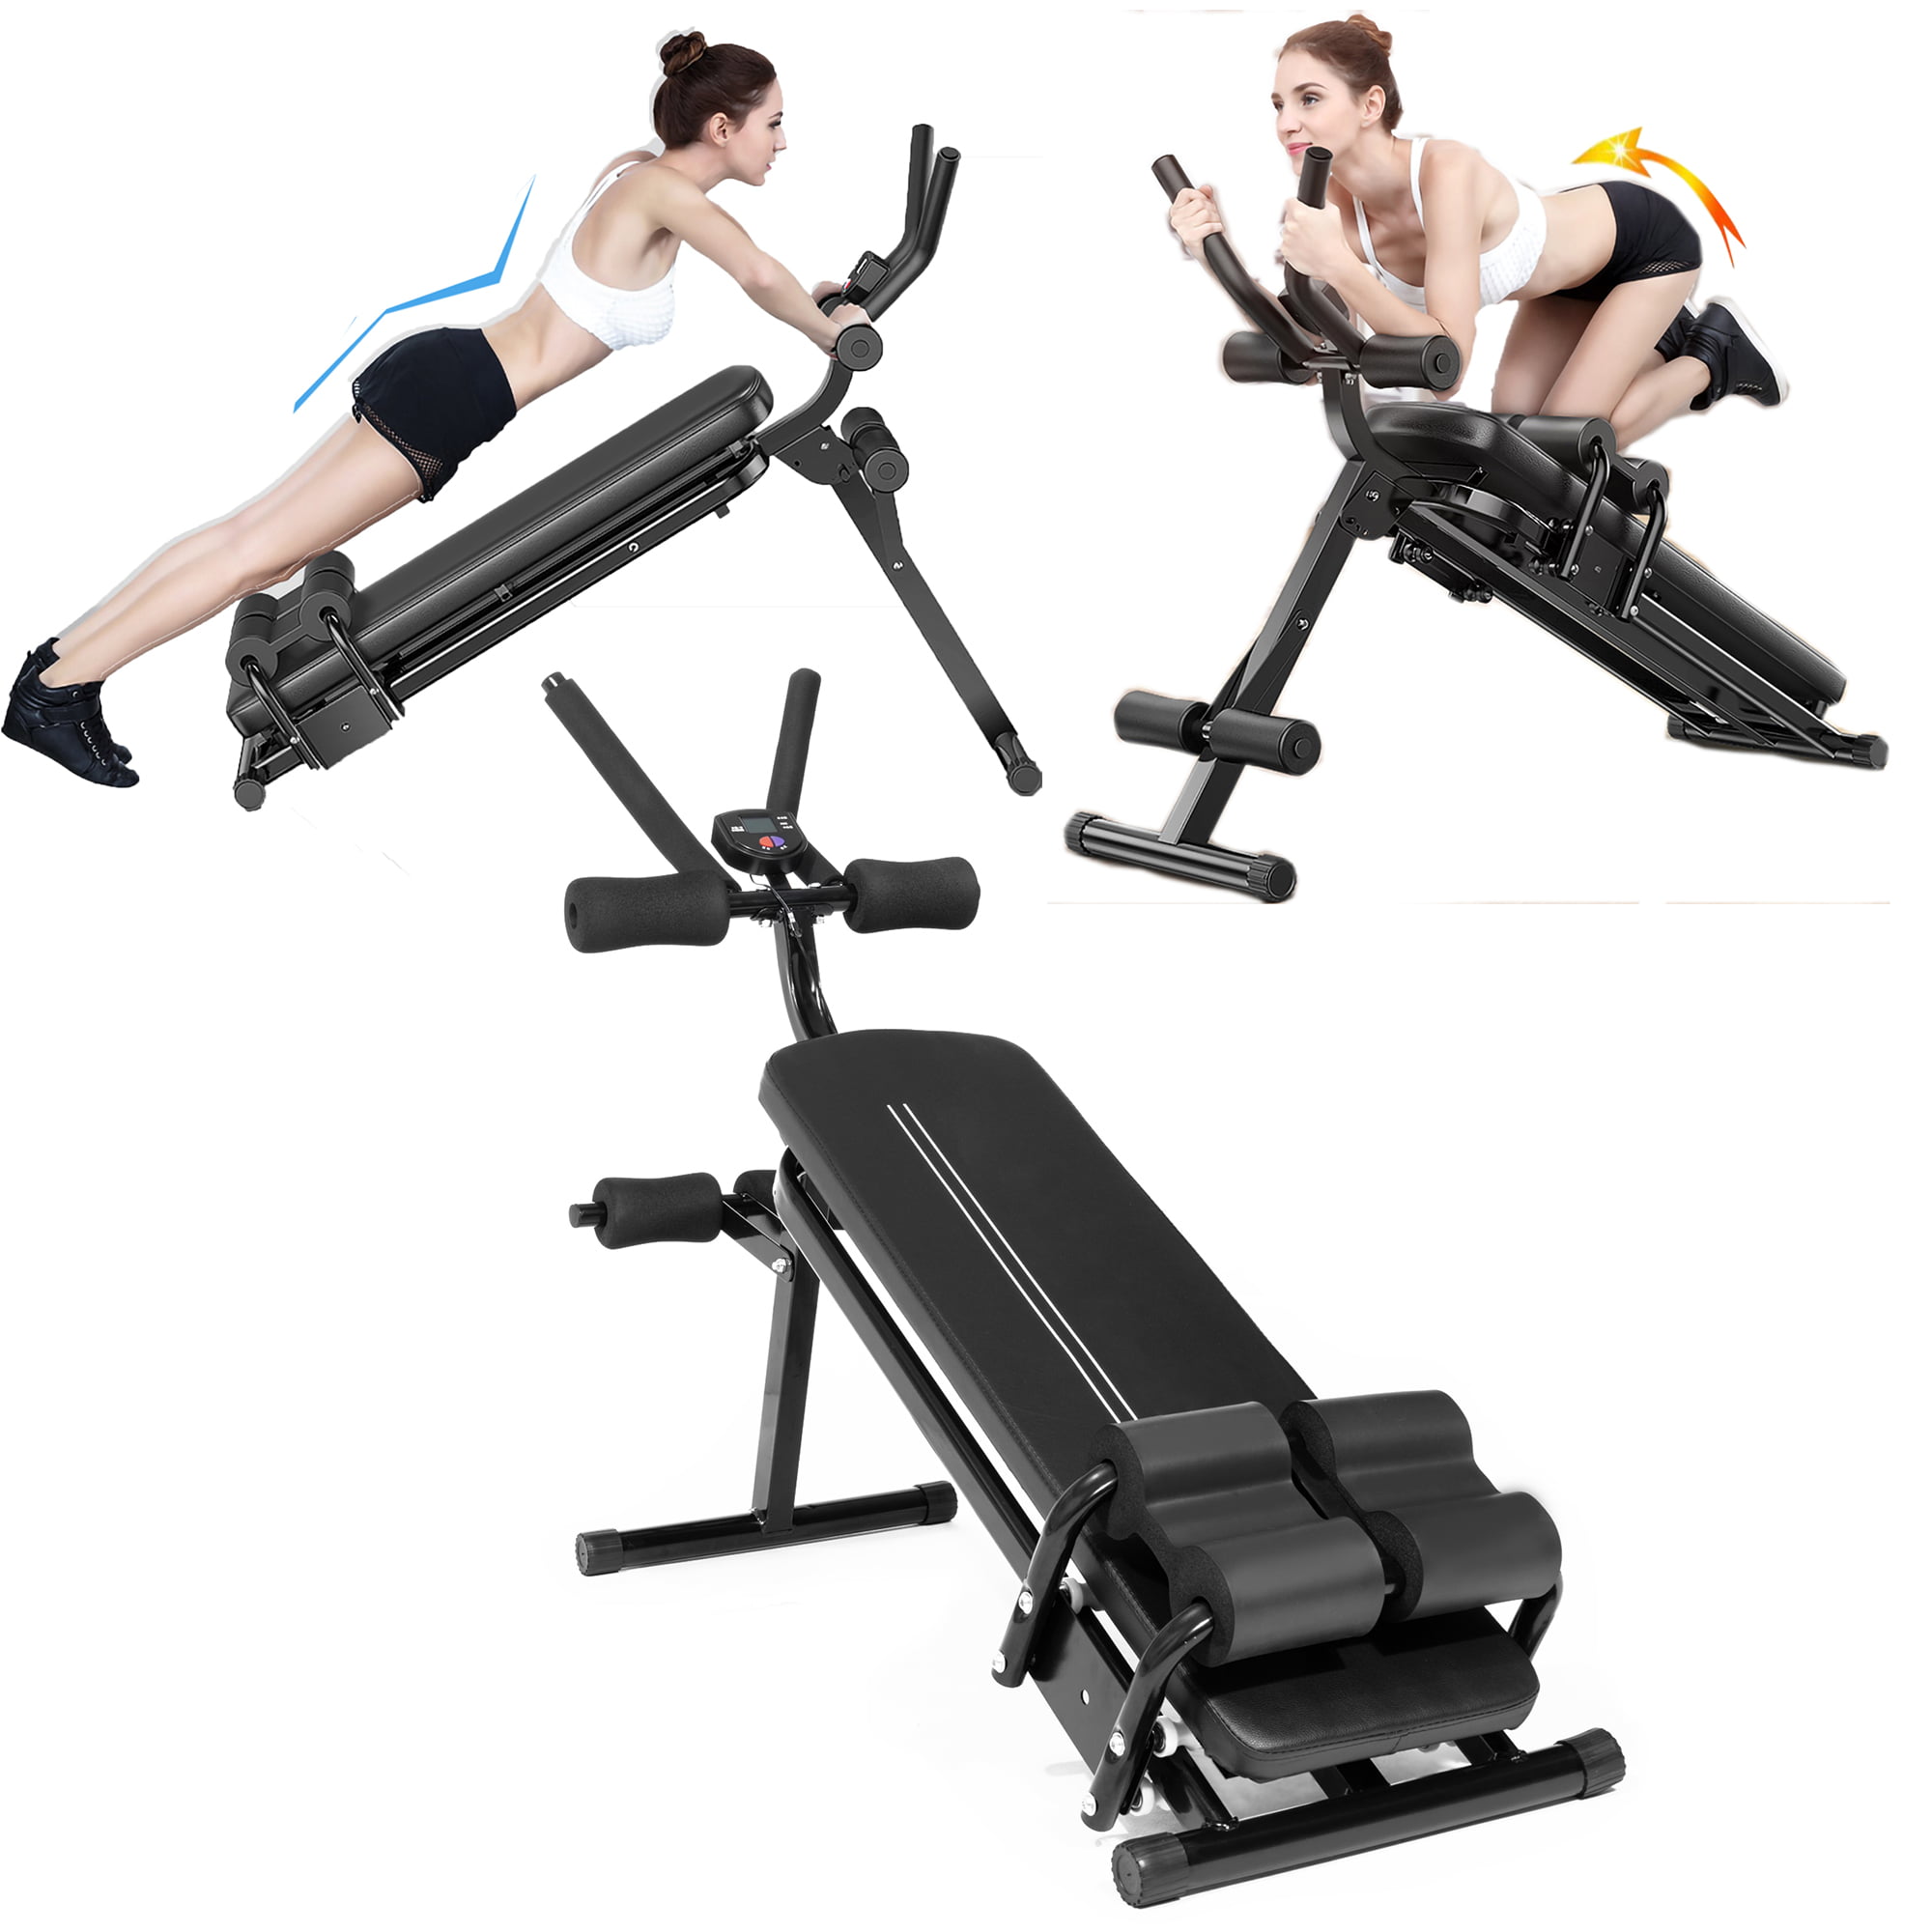 Adjustable Sit Up AB Abdominal Bench Flat Crunch Board Stomach Core Fitness Gym 